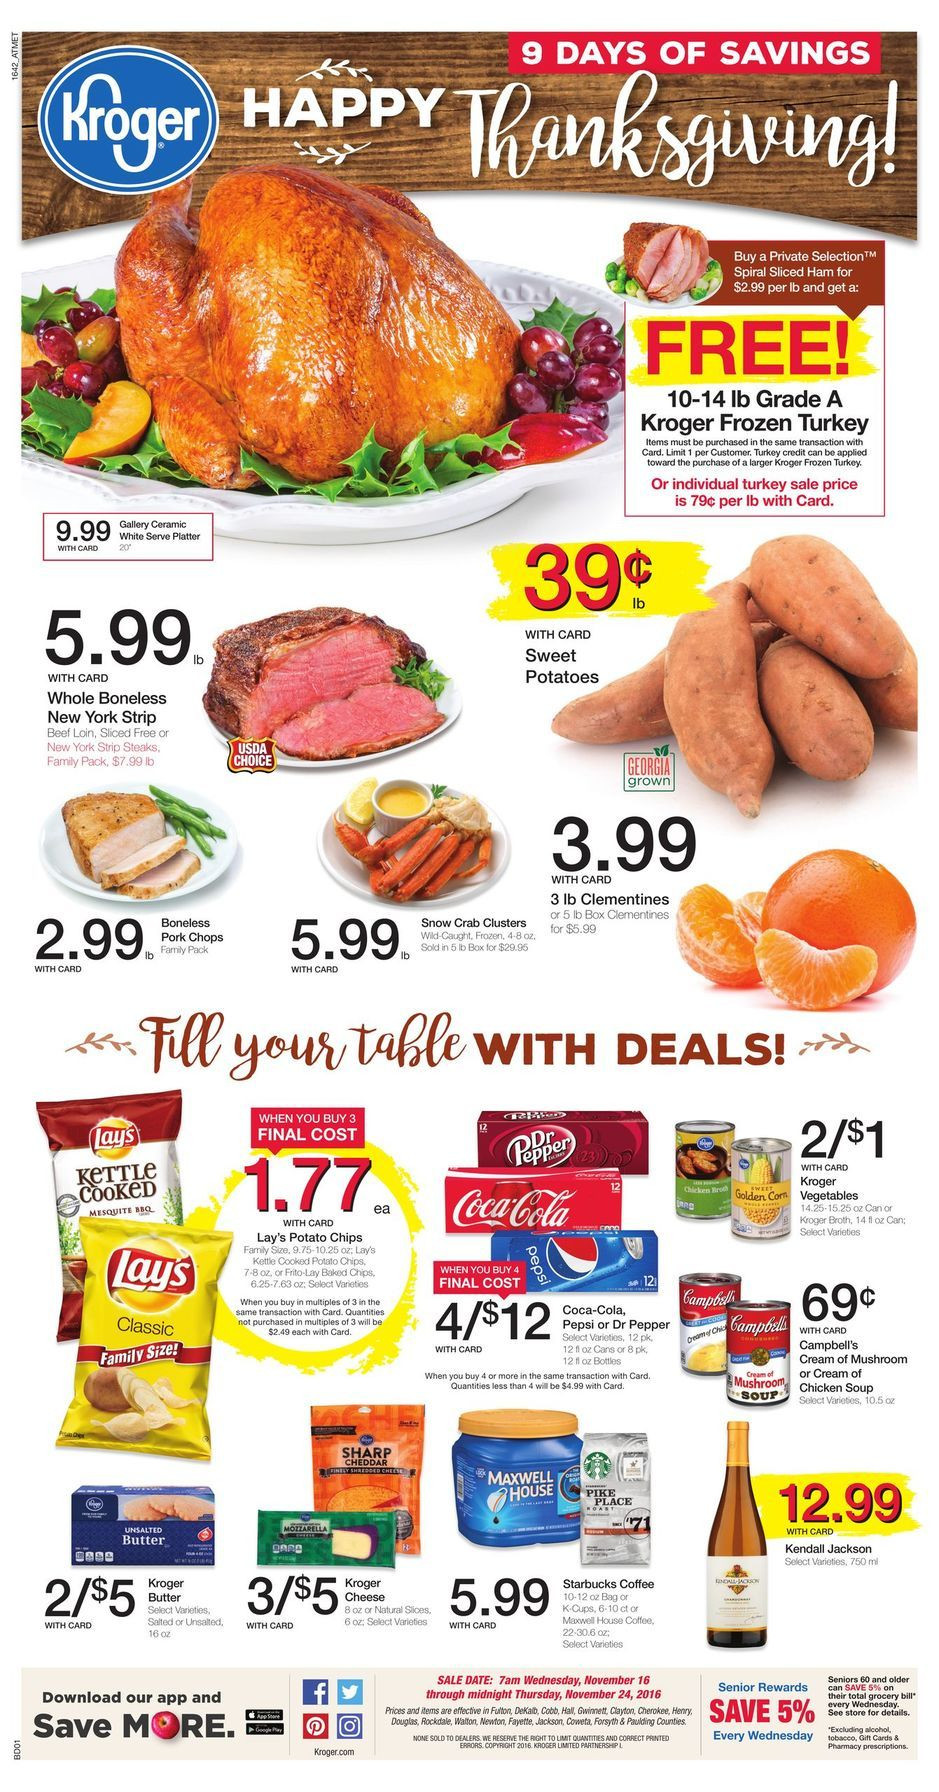 Turkey Sales For Thanksgiving
 Kroger Weekly Ad Thanksgiving Turkey Sales